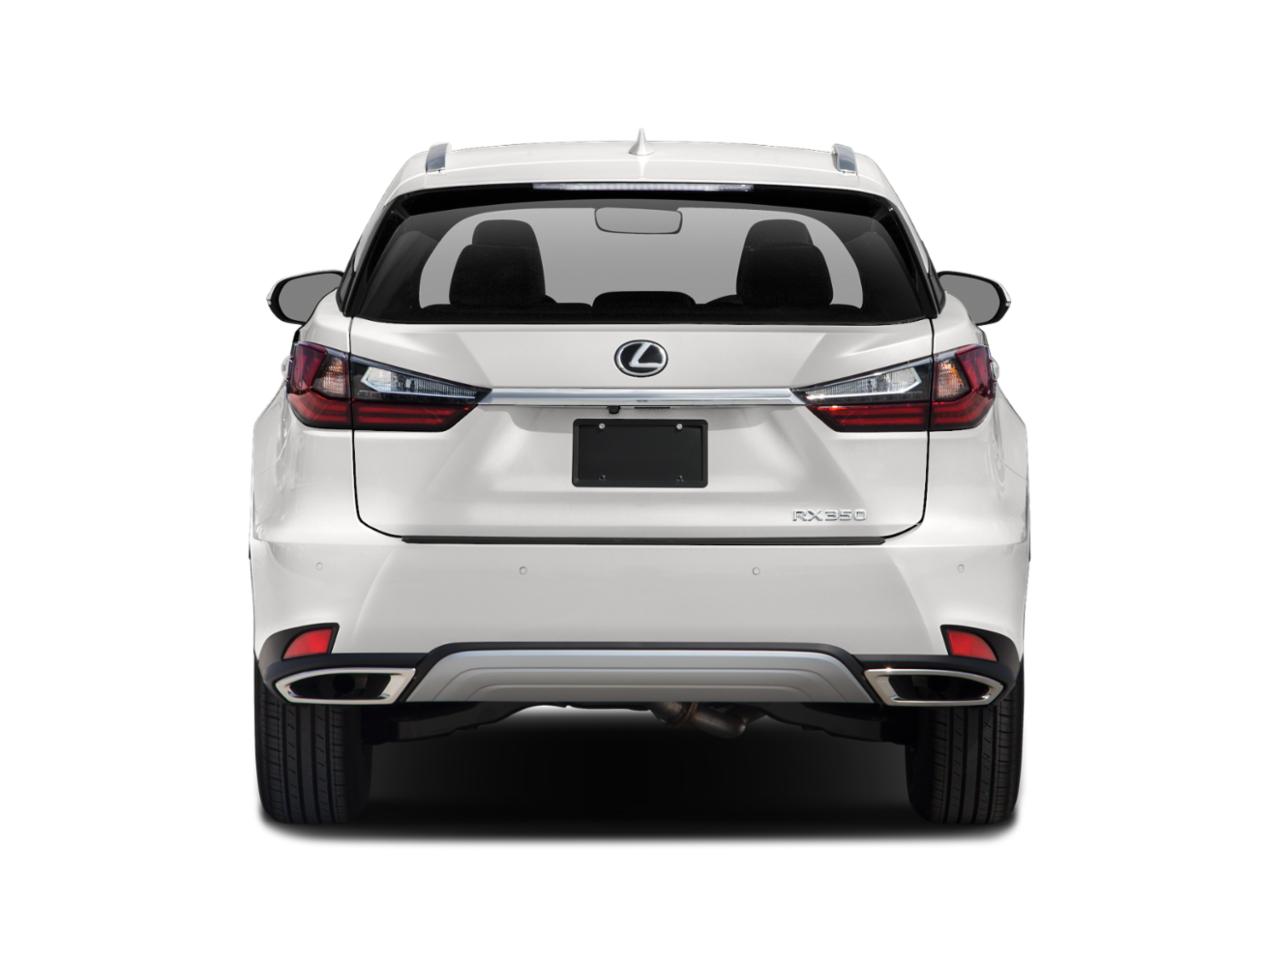 2021 Lexus RX 350 Vehicle Photo in Clearwater, FL 33761